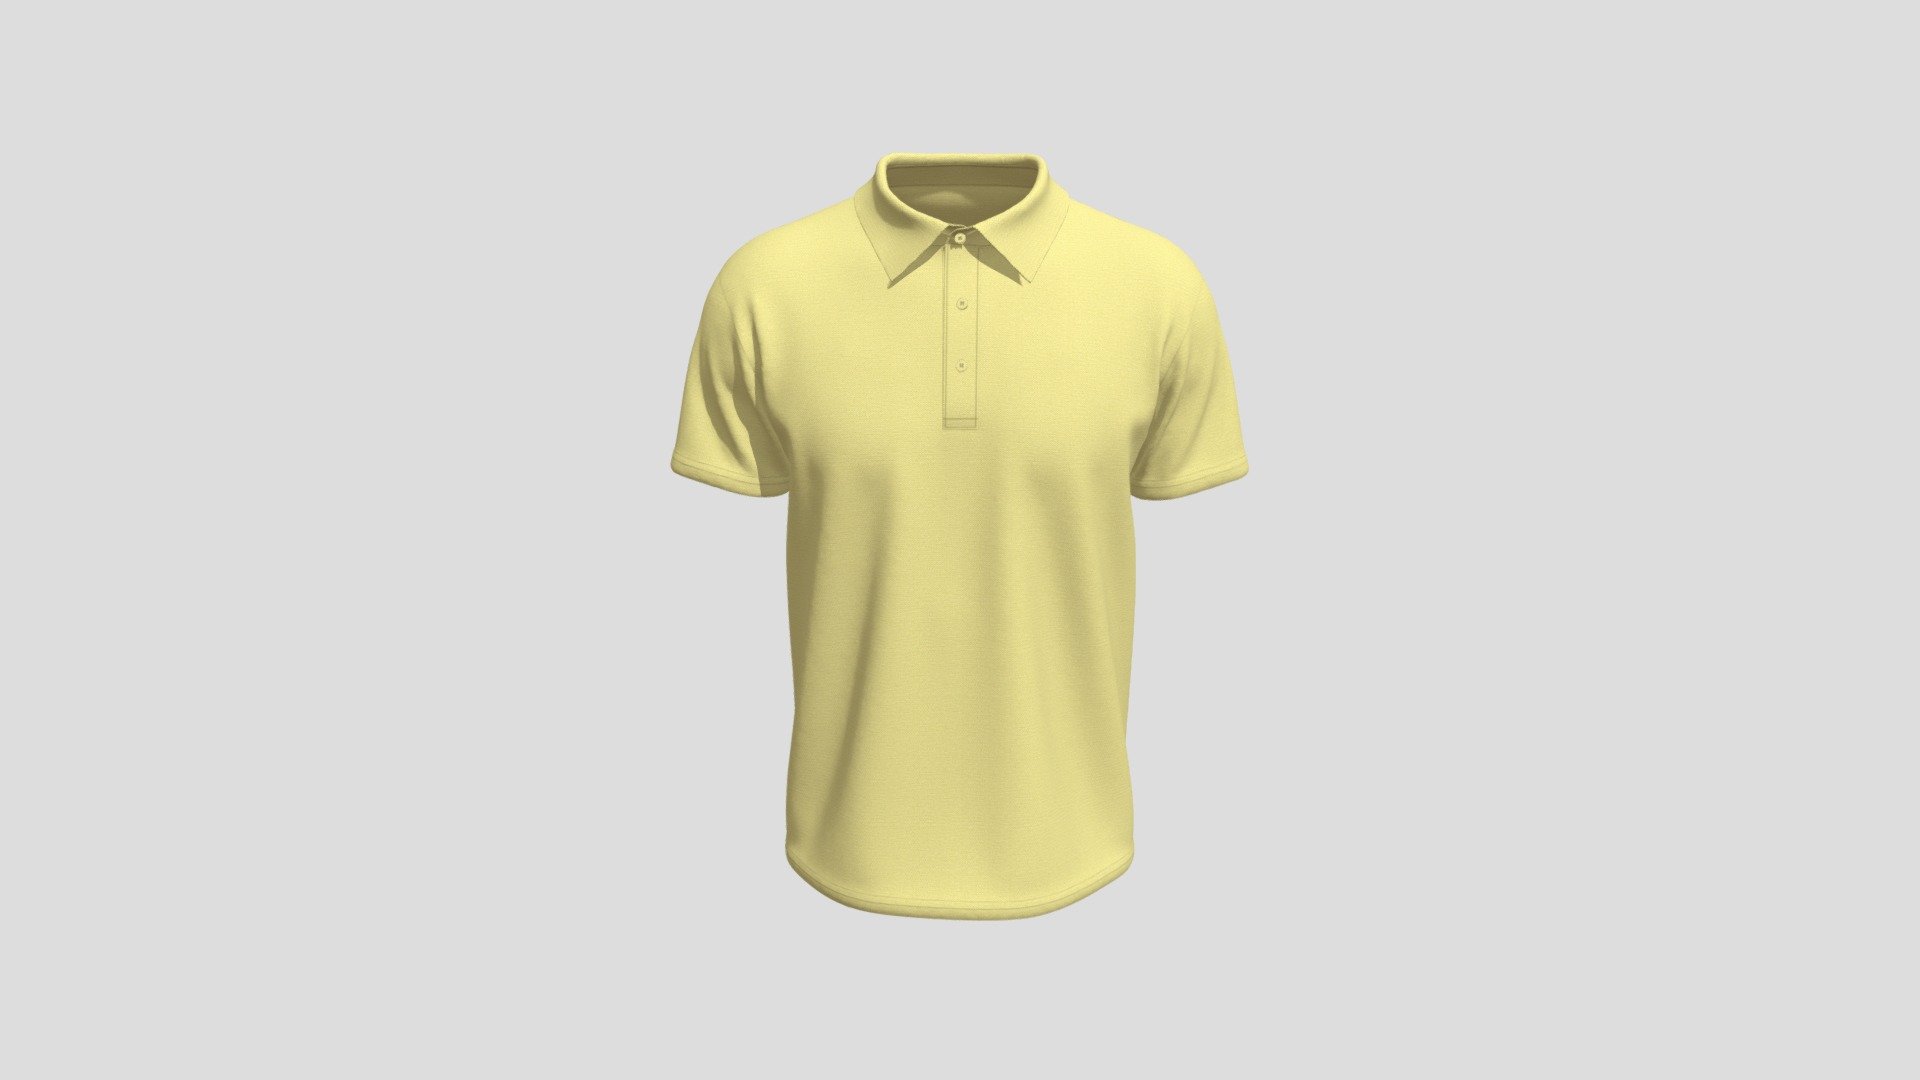 Cloth Title = Cotton Polo Shirt 

SKU = DG100216 

Category = Men 

Product Type = Polo 

Cloth Length = Regular 

Body Fit = Regular Fit 

Occasion = Casual 
 
Sleeve Style = Short Sleeve 


Our Services:

3D Apparel Design.

OBJ,FBX,GLTF Making with High/Low Poly.

Fabric Digitalization.

Mockup making.

3D Teck Pack.

Pattern Making.

2D Illustration.

Cloth Animation and 360 Spin Video.


Contact us:- 

Email: info@digitalfashionwear.com 

Website: https://digitalfashionwear.com 


We designed all the types of cloth specially focused on product visualization, e-commerce, fitting, and production. 

We will design: 

T-shirts 

Polo shirts 

Hoodies 

Sweatshirt 

Jackets 

Shirts 

TankTops 

Trousers 

Bras 

Underwear 

Blazer 

Aprons 

Leggings 

and All Fashion items. 





Our goal is to make sure what we provide you, meets your demand 3d model